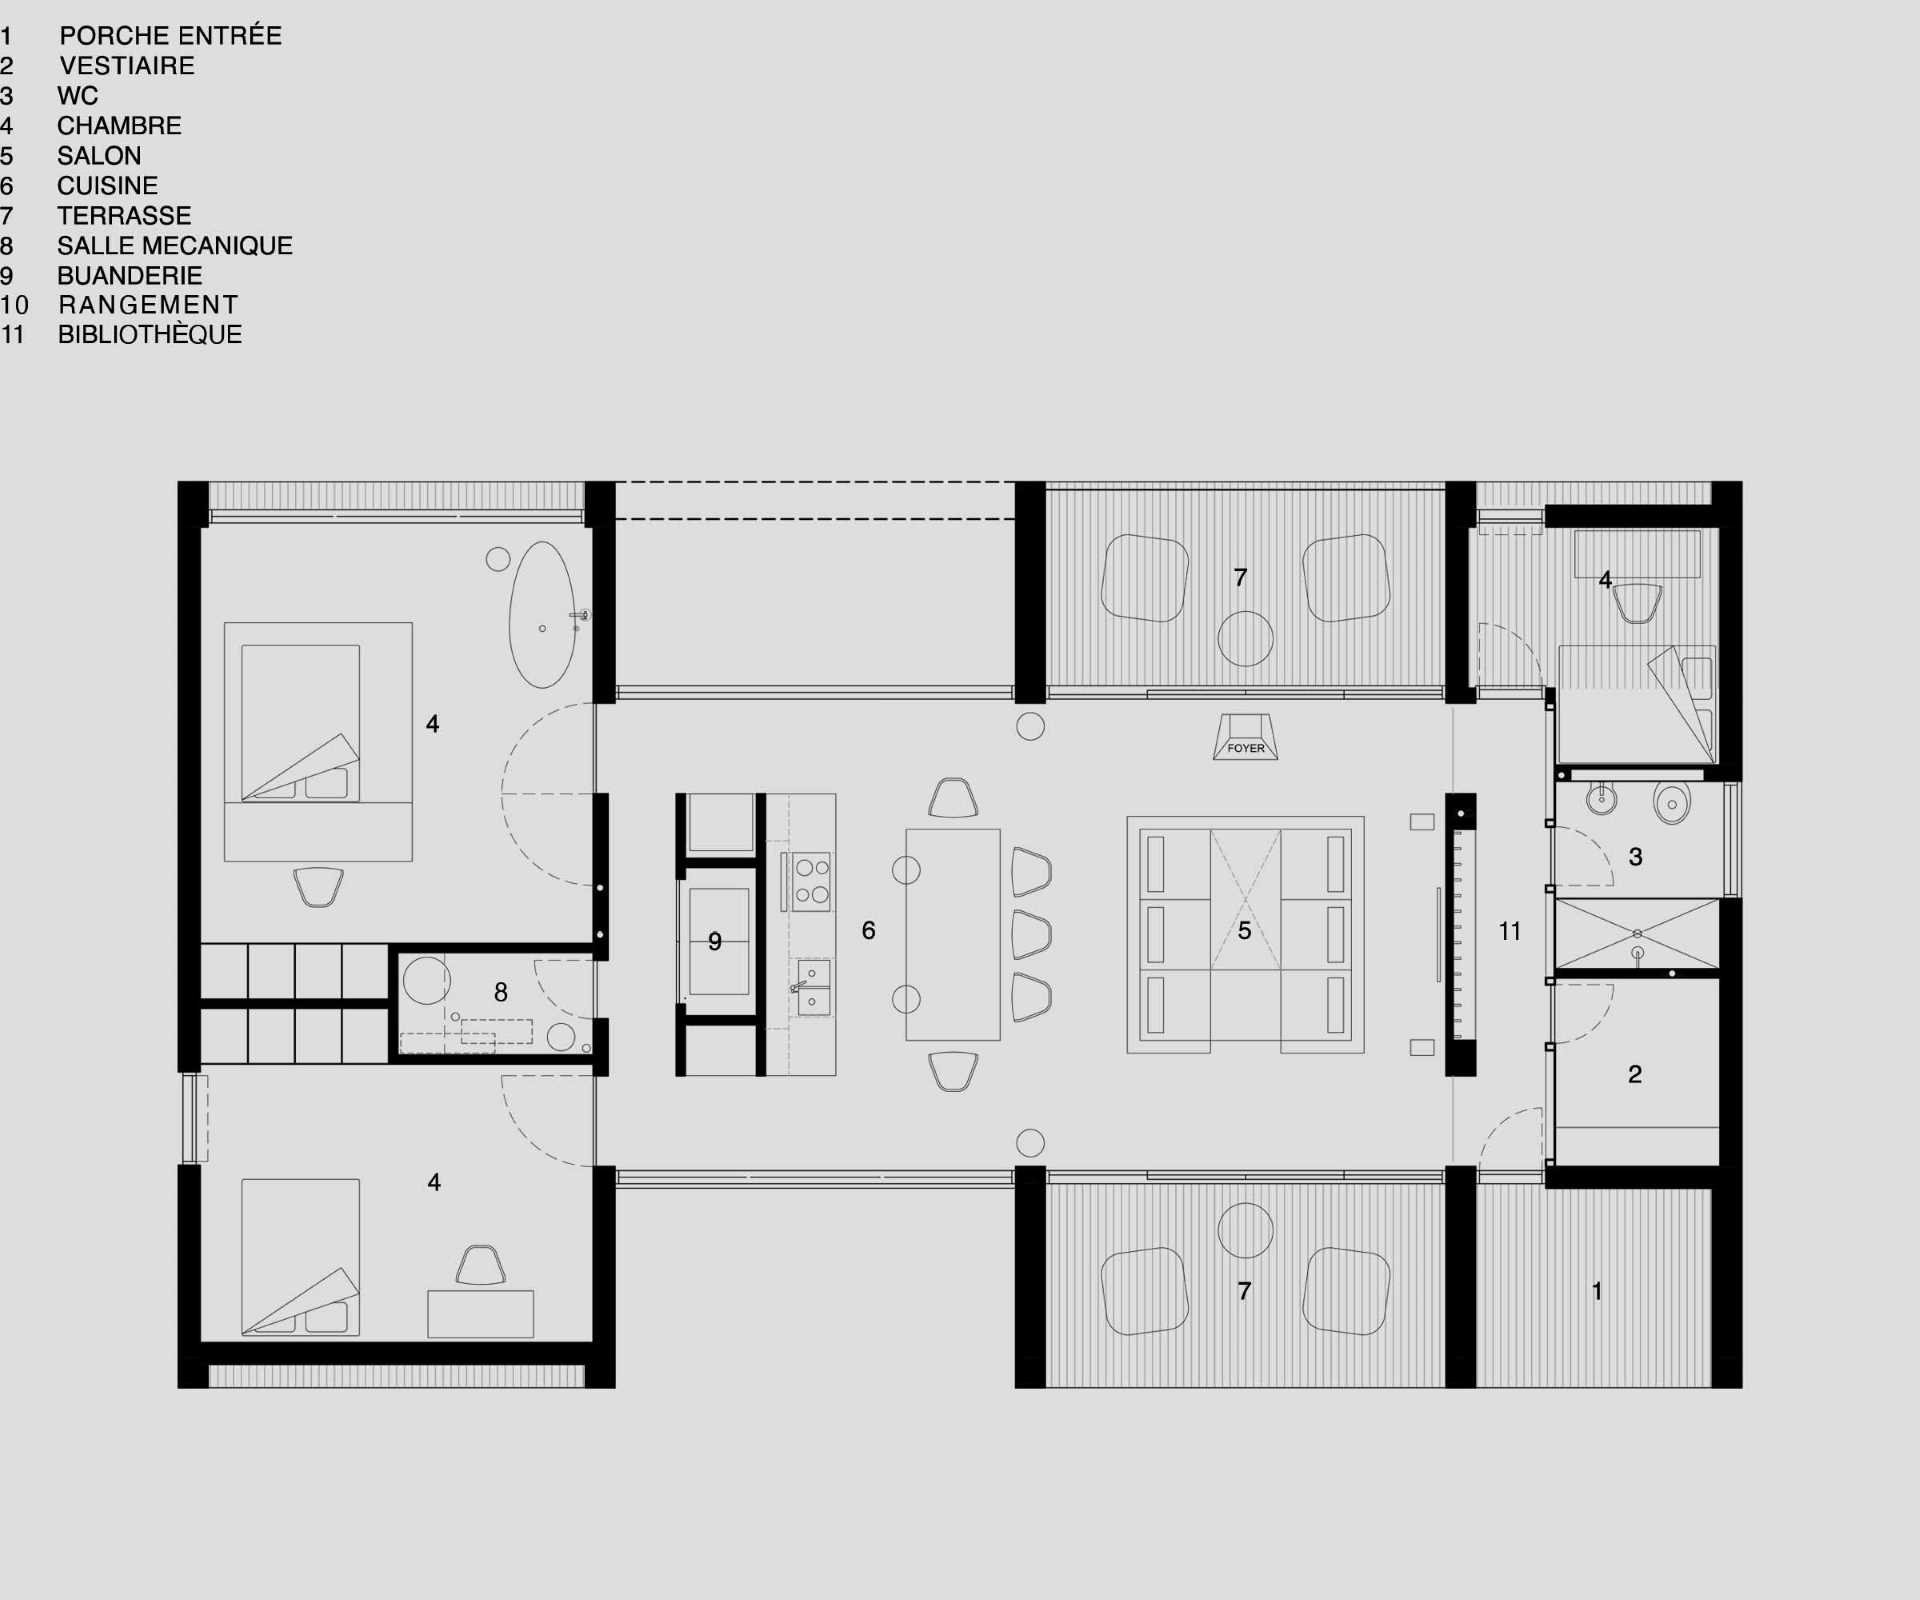 The floor plan of a modern wood house.